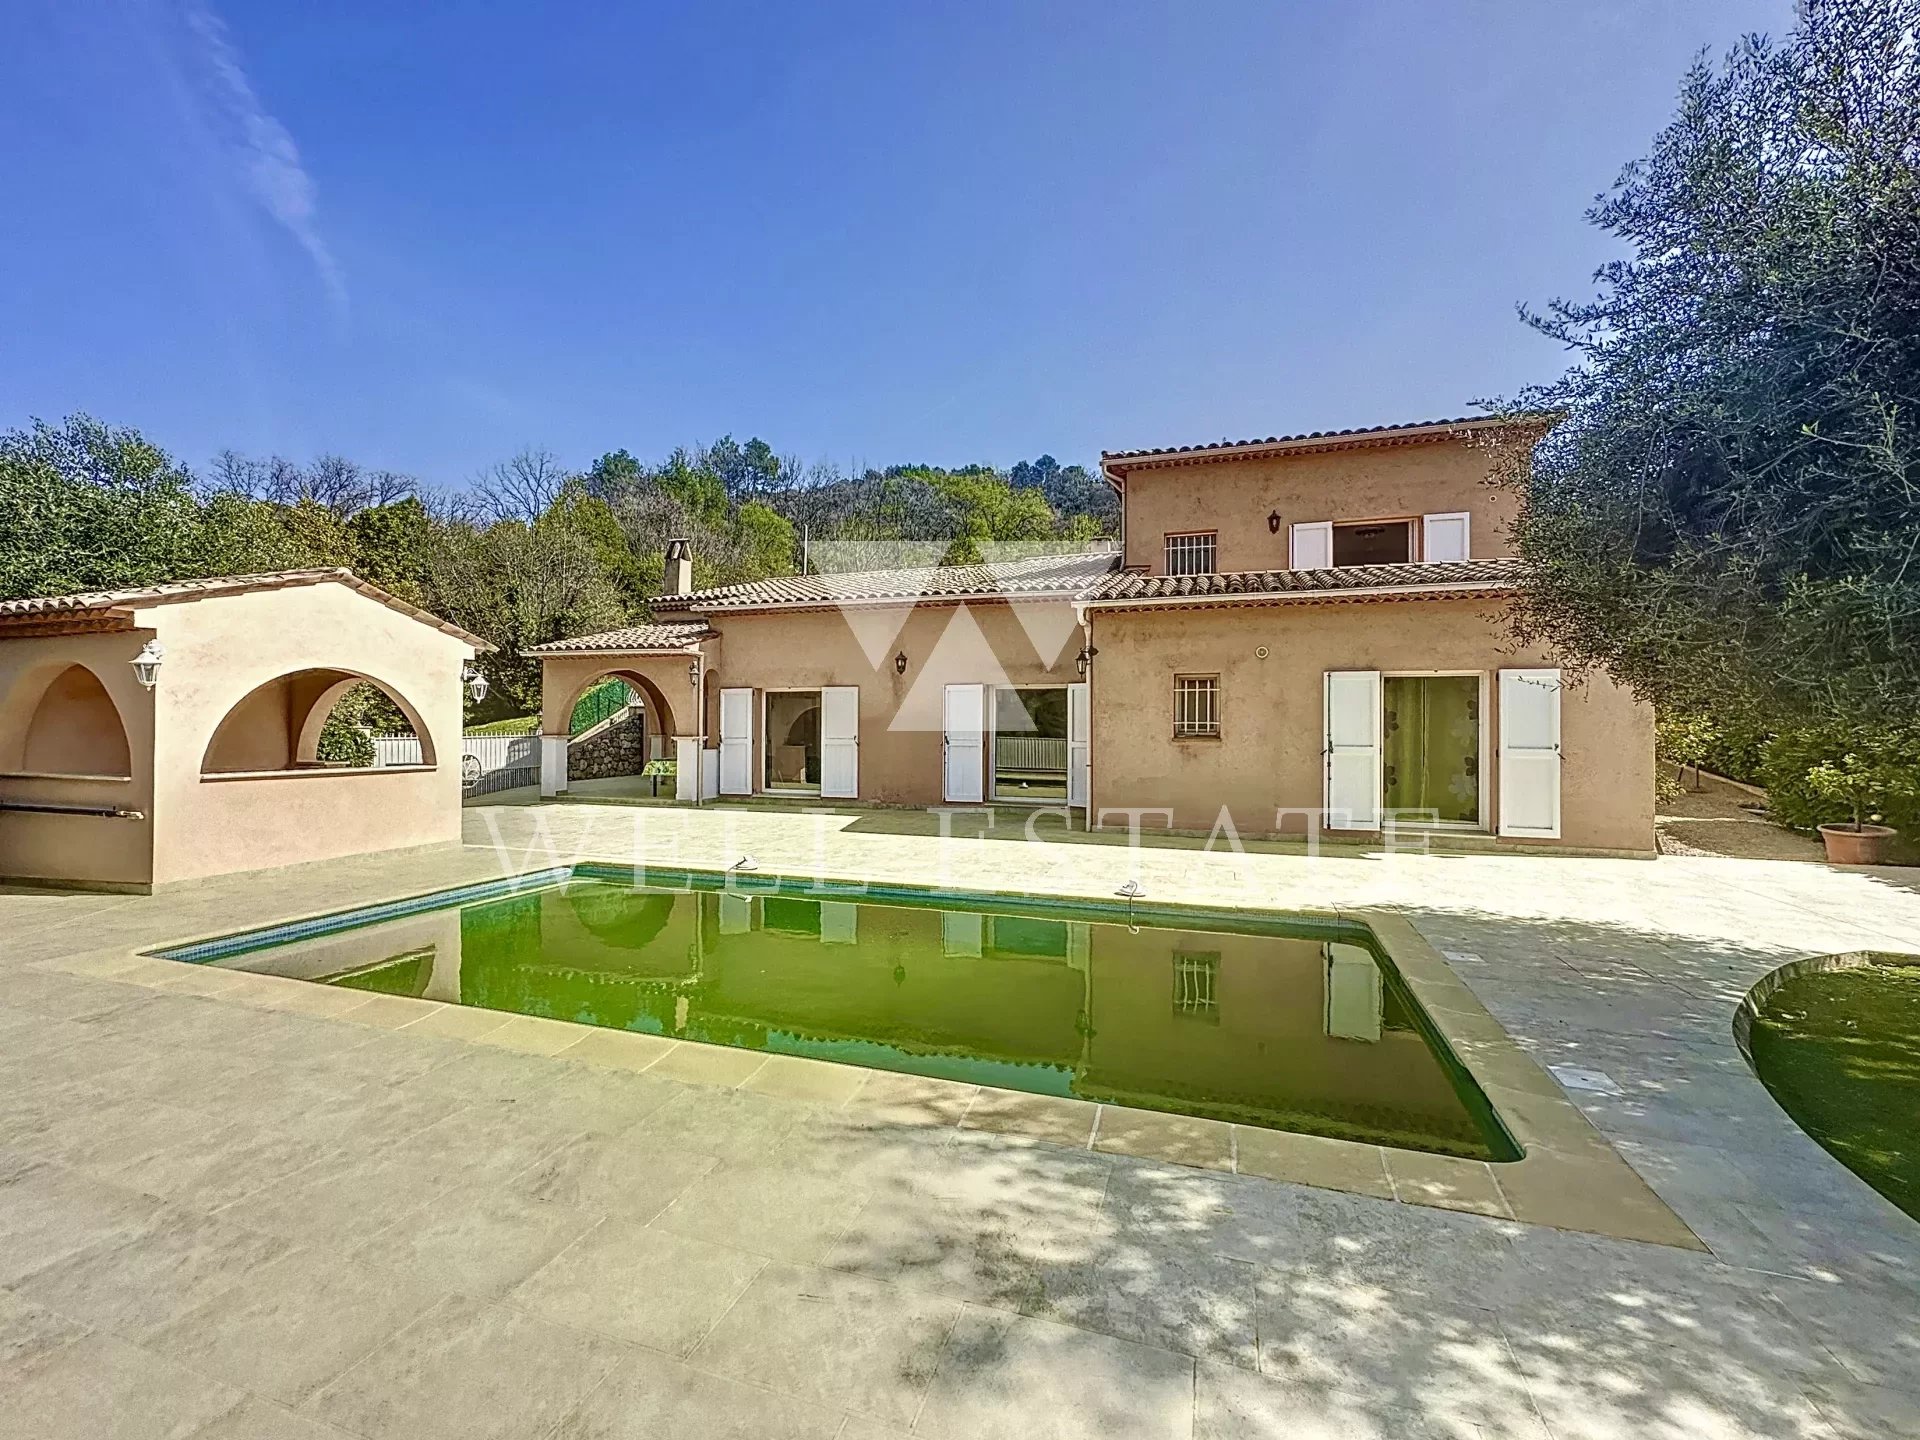 VILLA IN GRASSE 240M2 ON A 2000M2 PLOT WITH POOL AND PANORAMIC VIEW